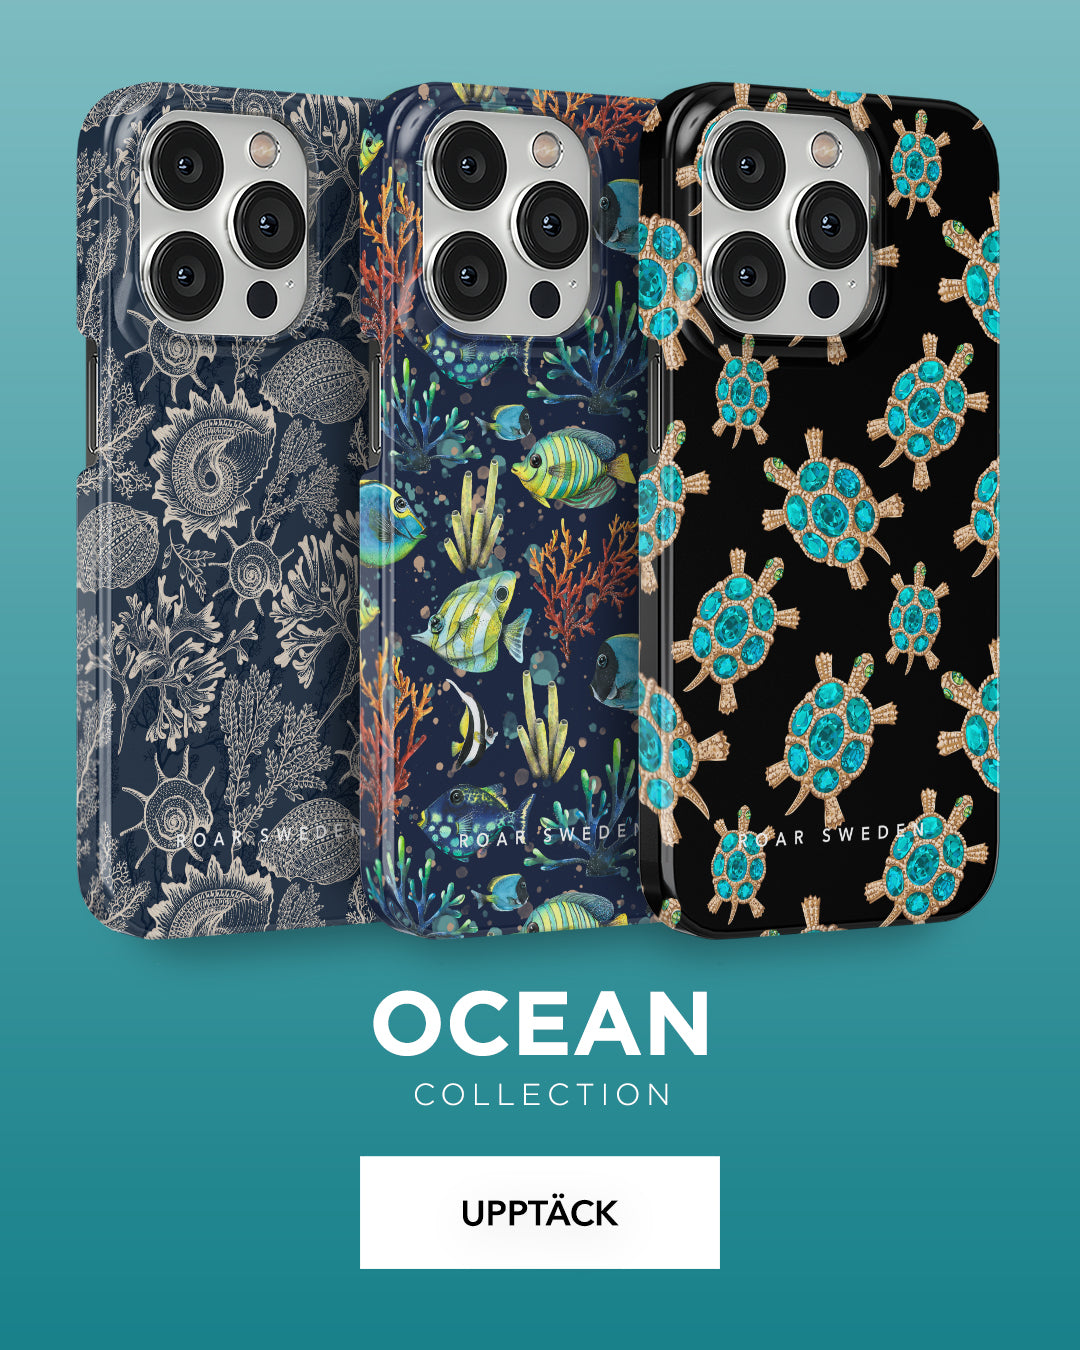 Three smartphone cases with ocean-themed designs from the "ocean collection" by upptäck.